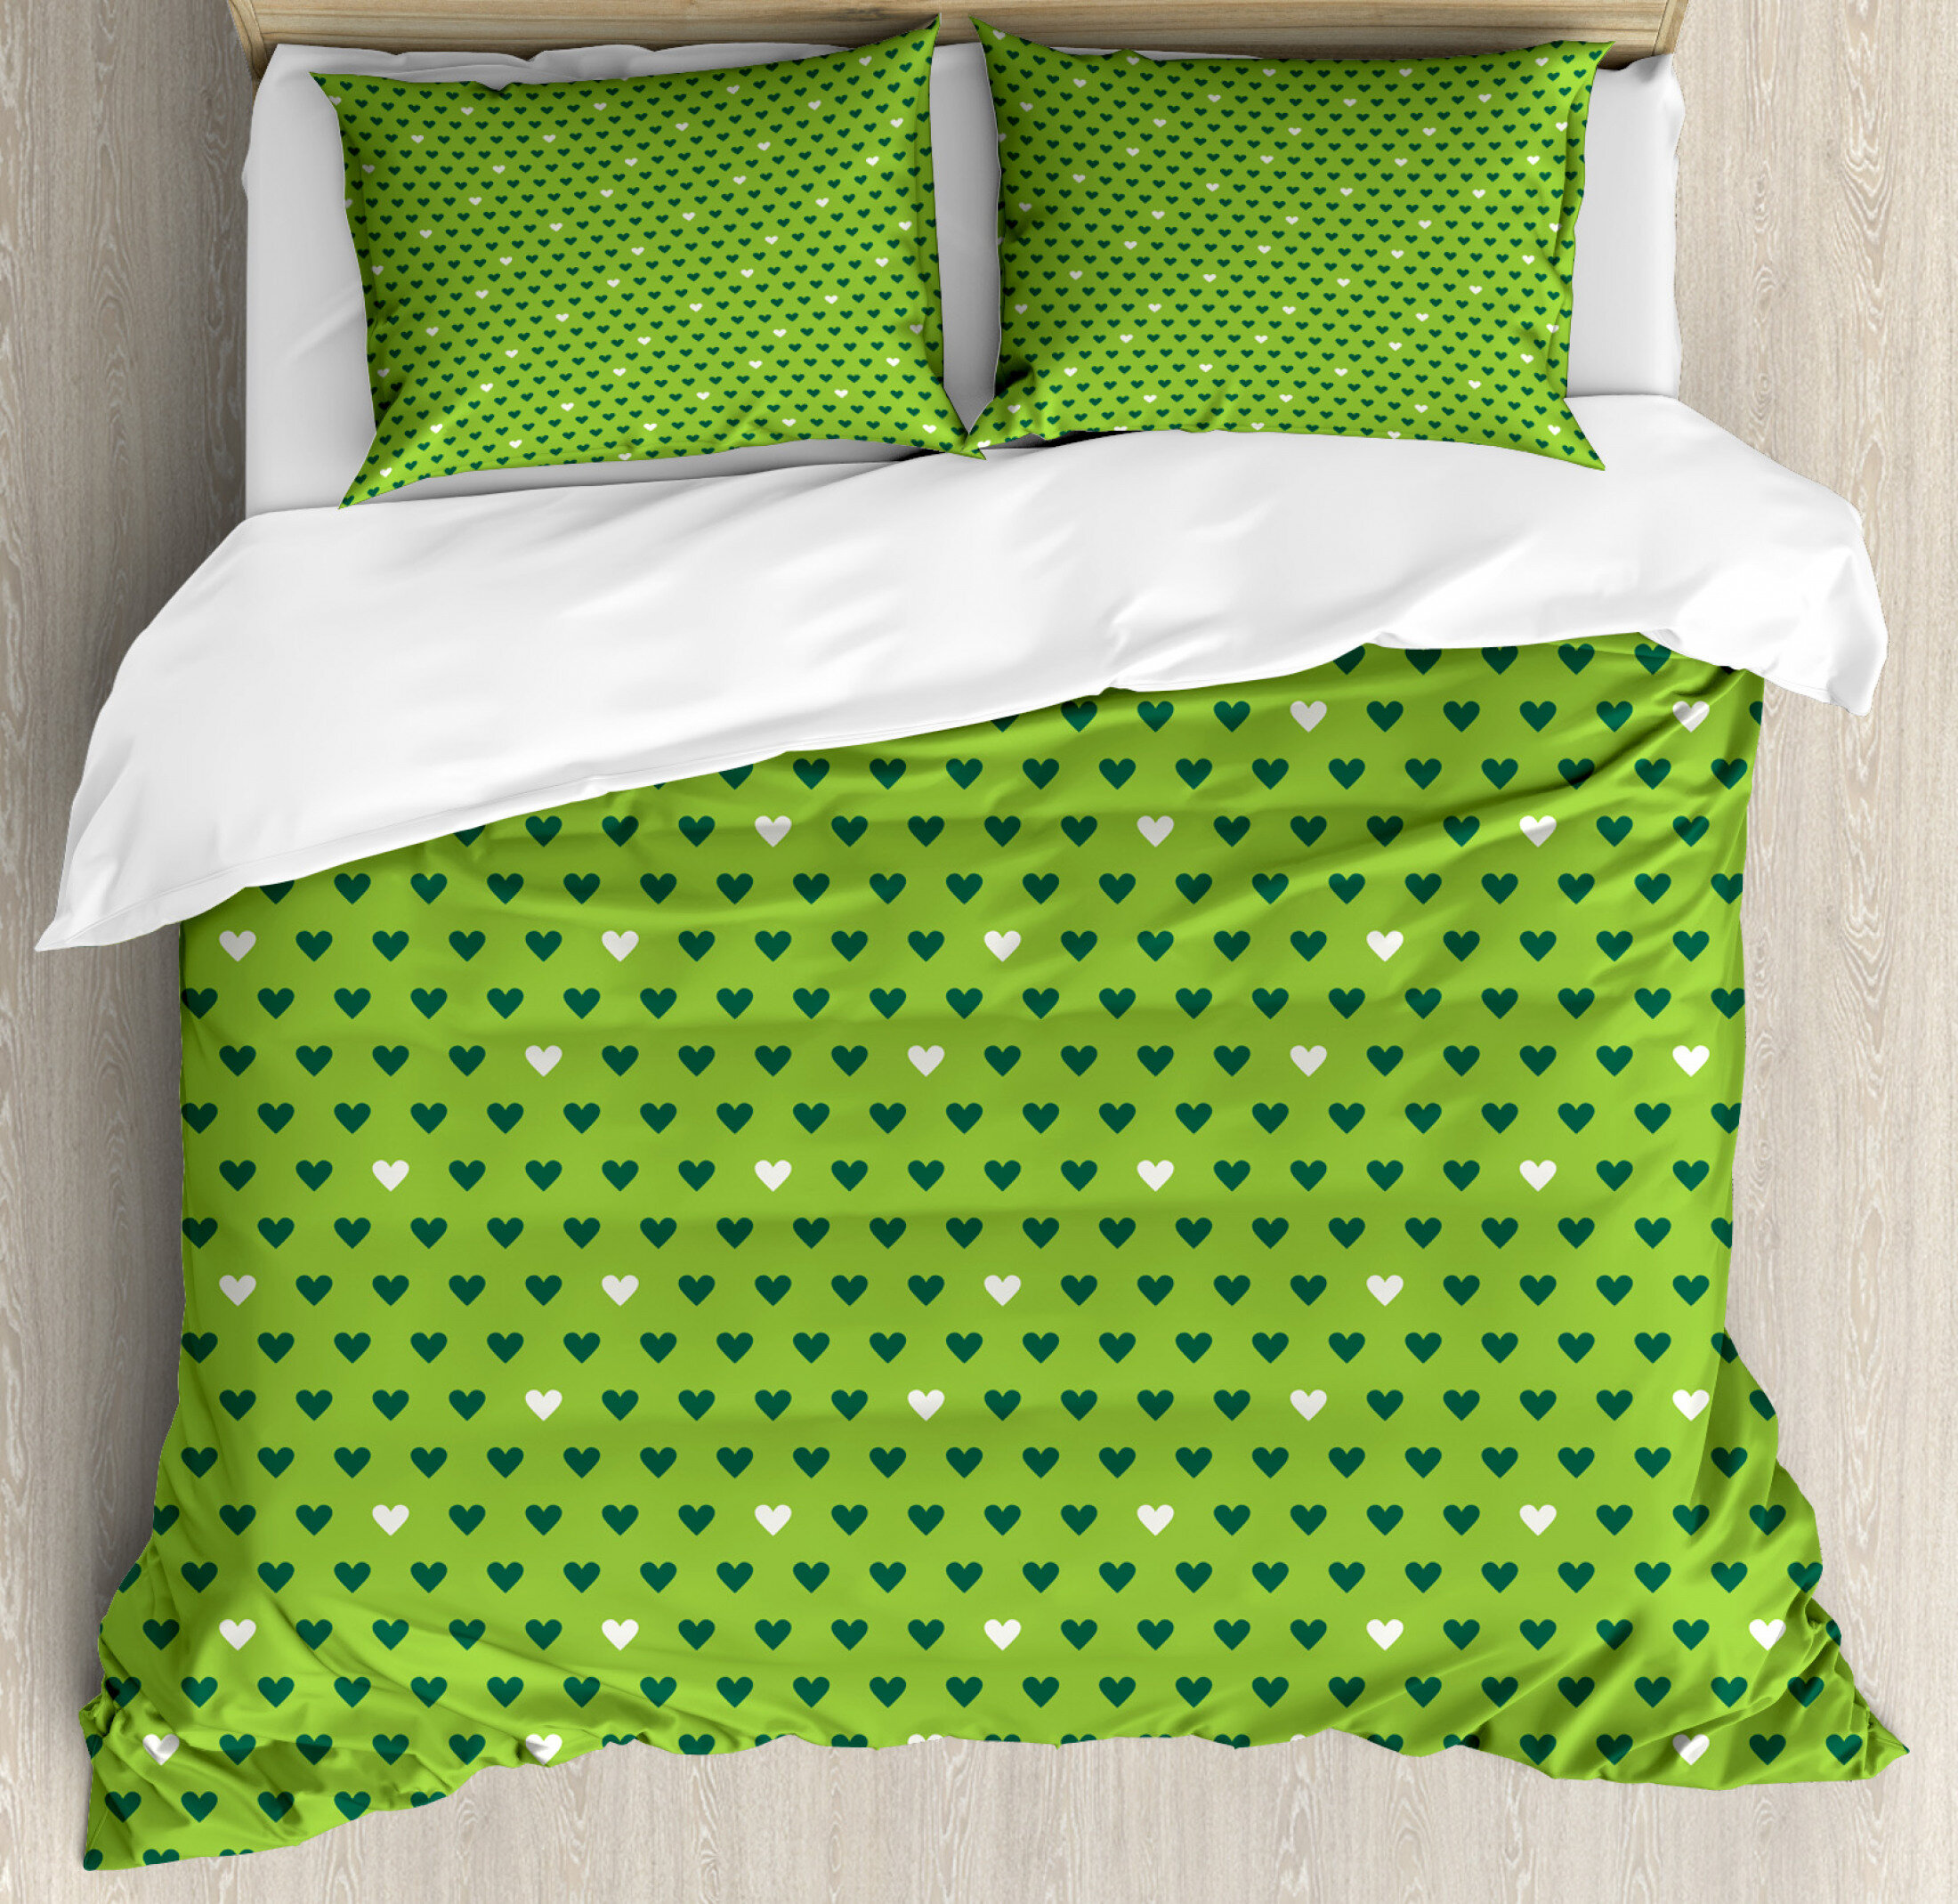 East Urban Home Ambesonne Green Duvet Cover Set Small Heart